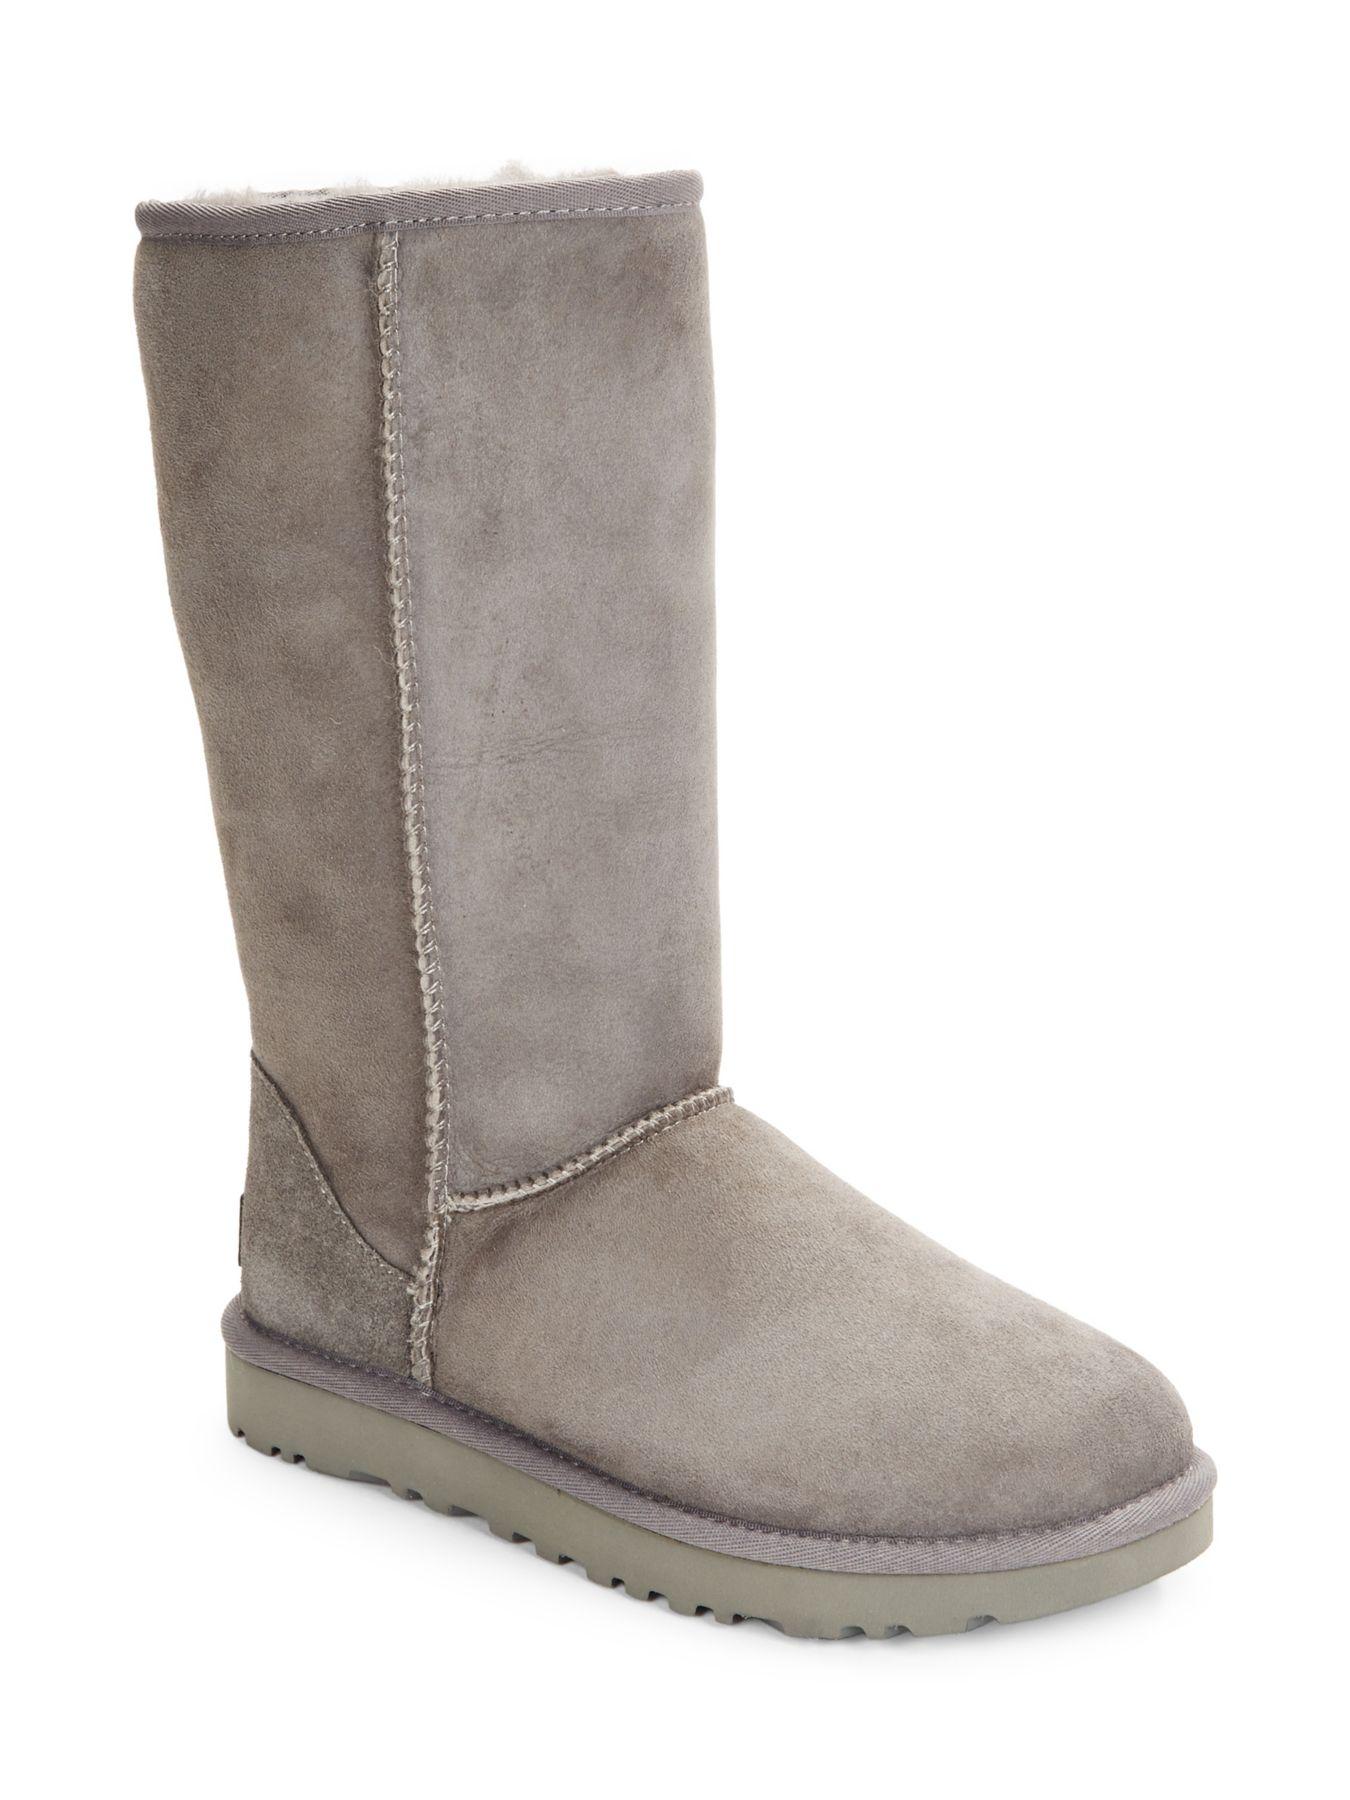 UGG Classic Tall Ii Shearling-lined Suede Boots in Grey (Gray) - Lyst